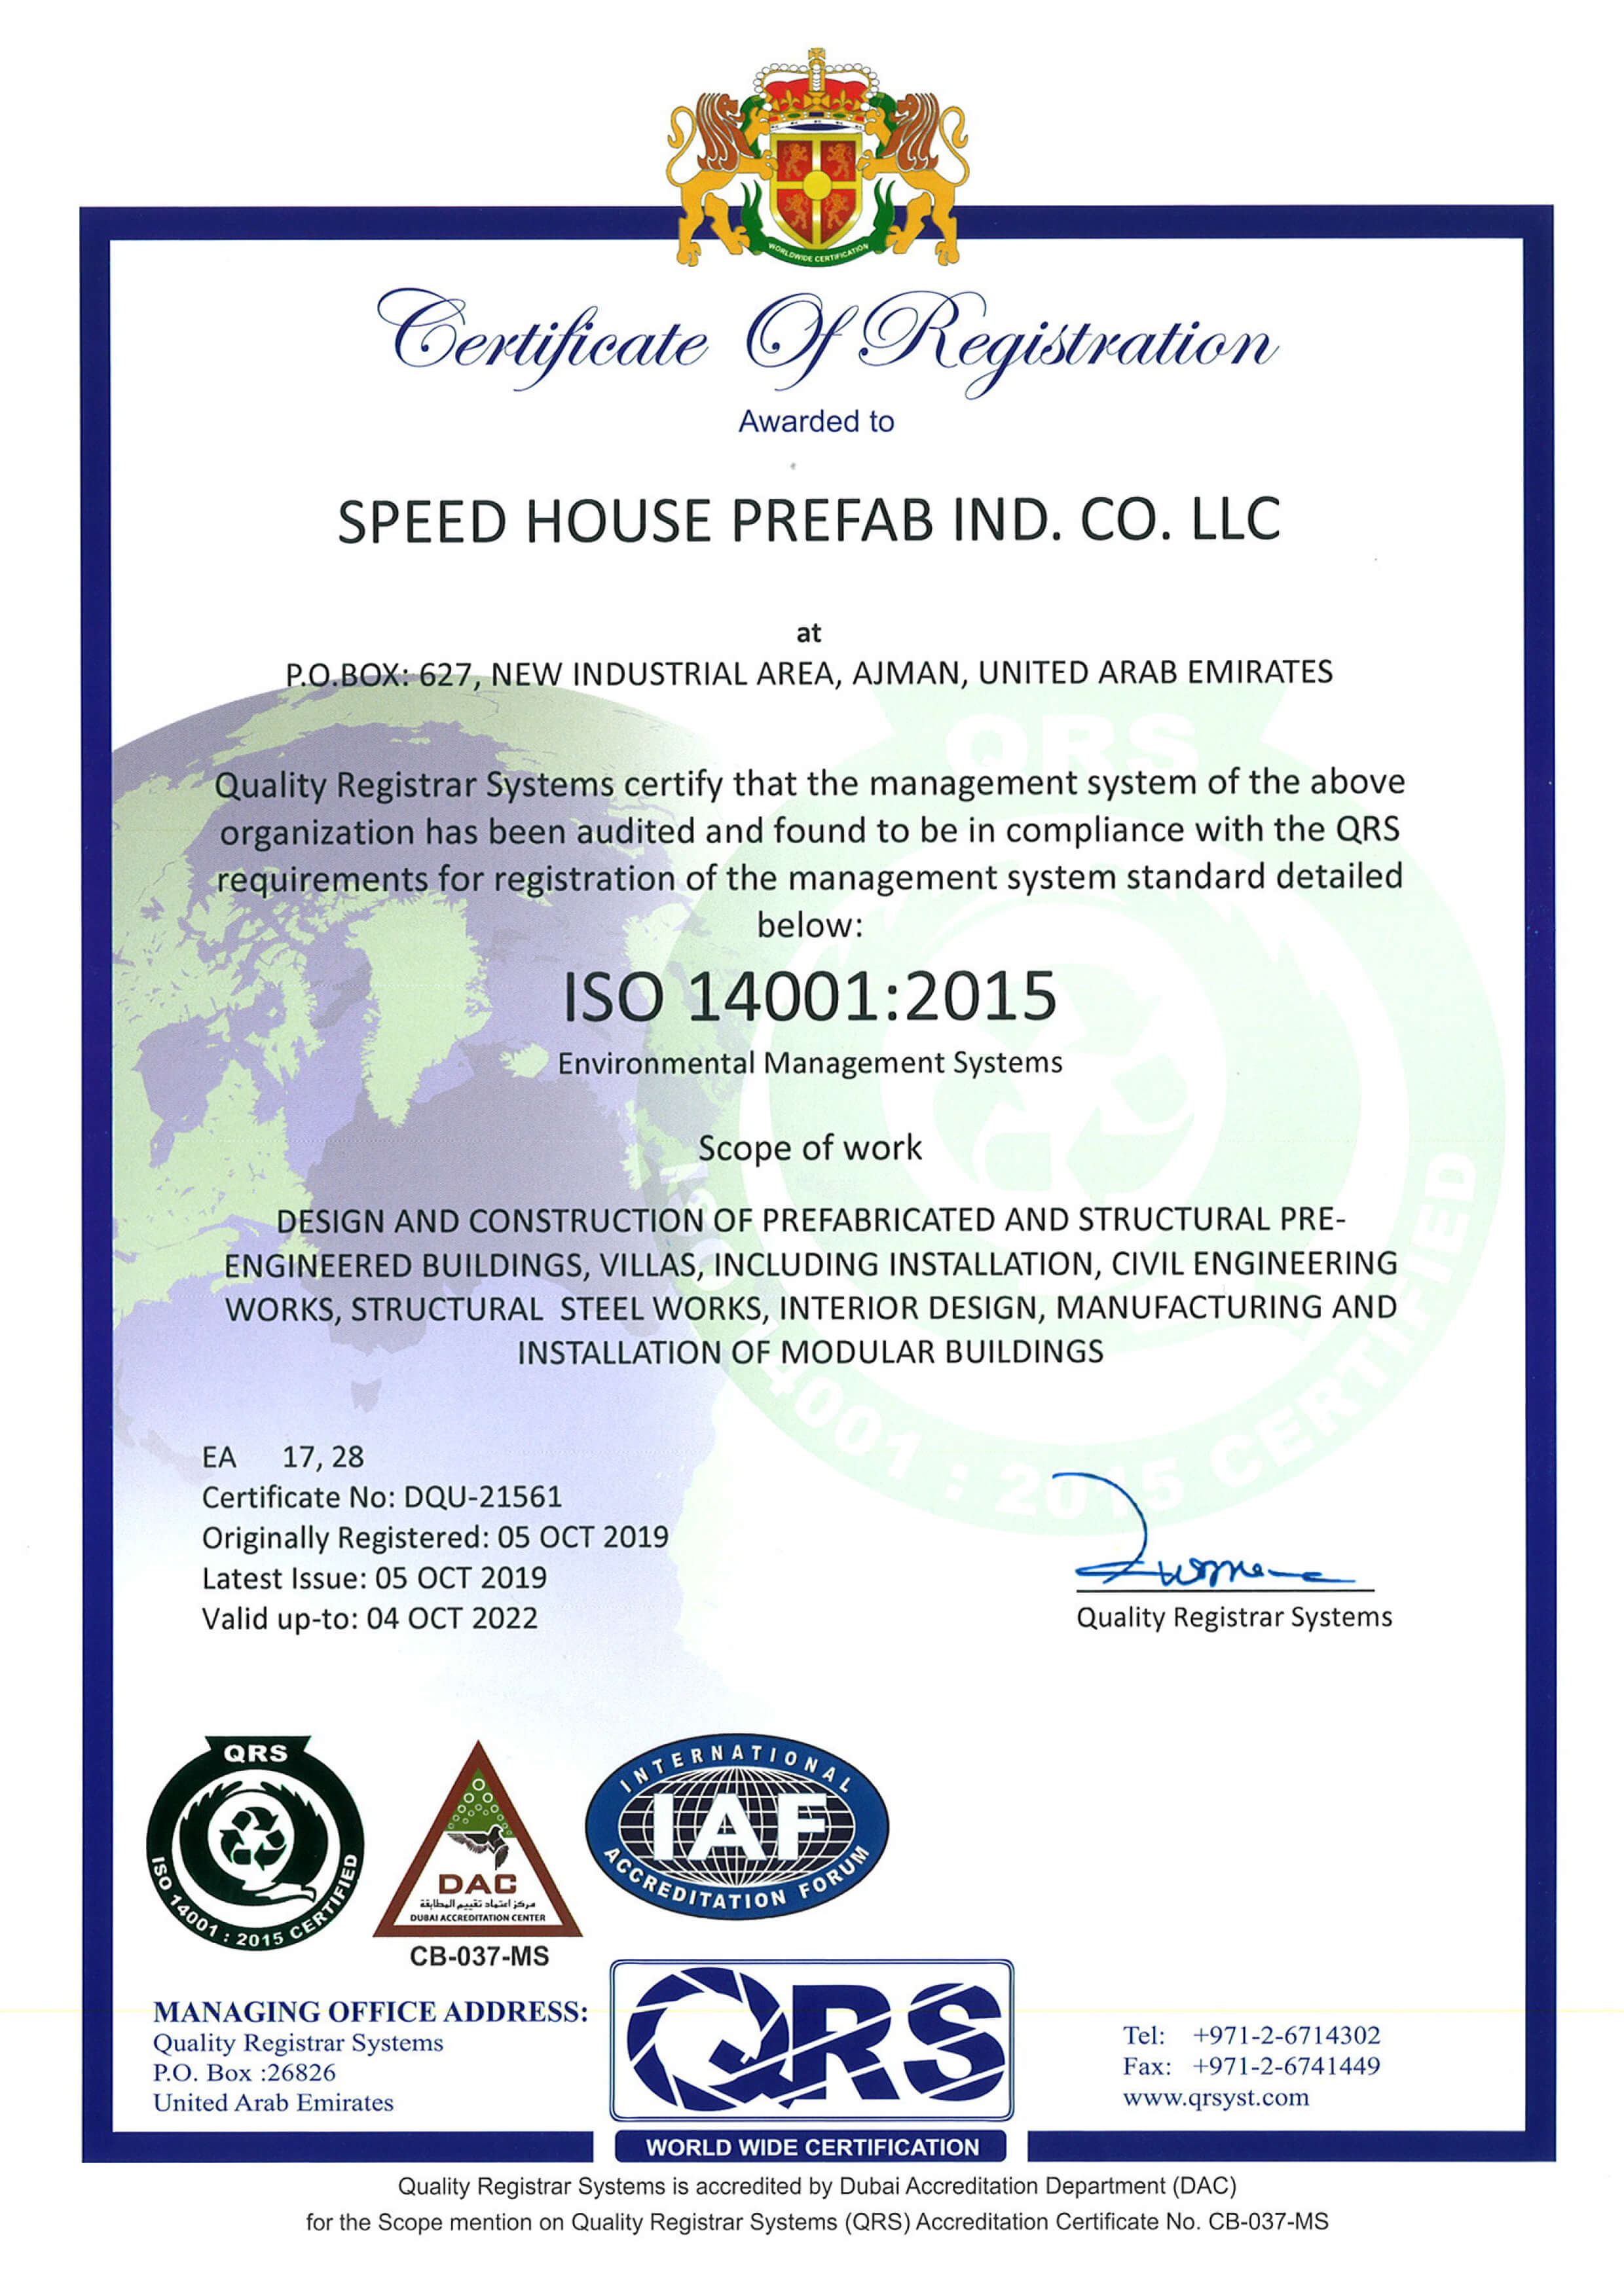 Speed House Group Prefab ISO 14001 Certificate